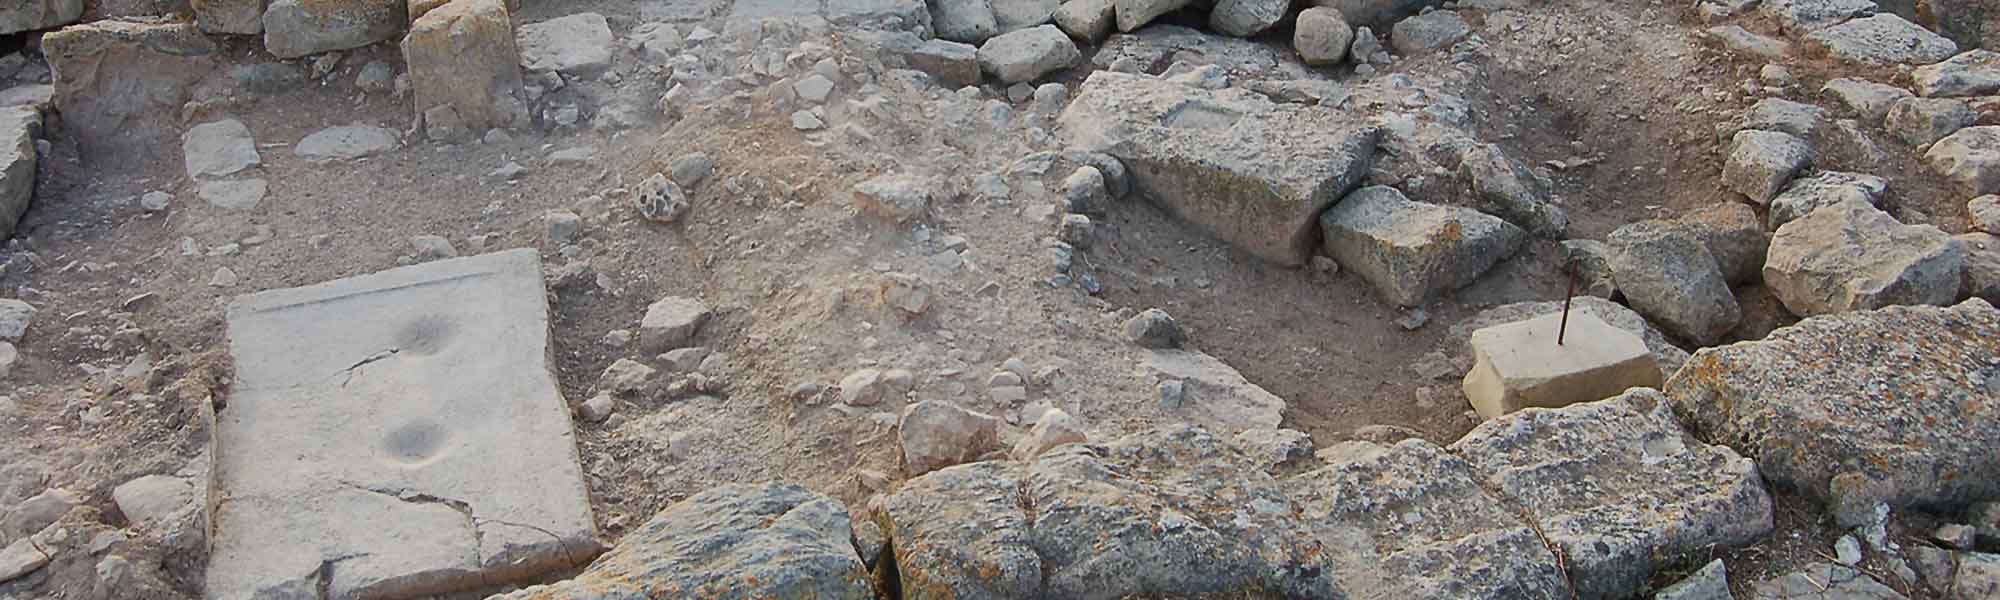 Archaeological remains